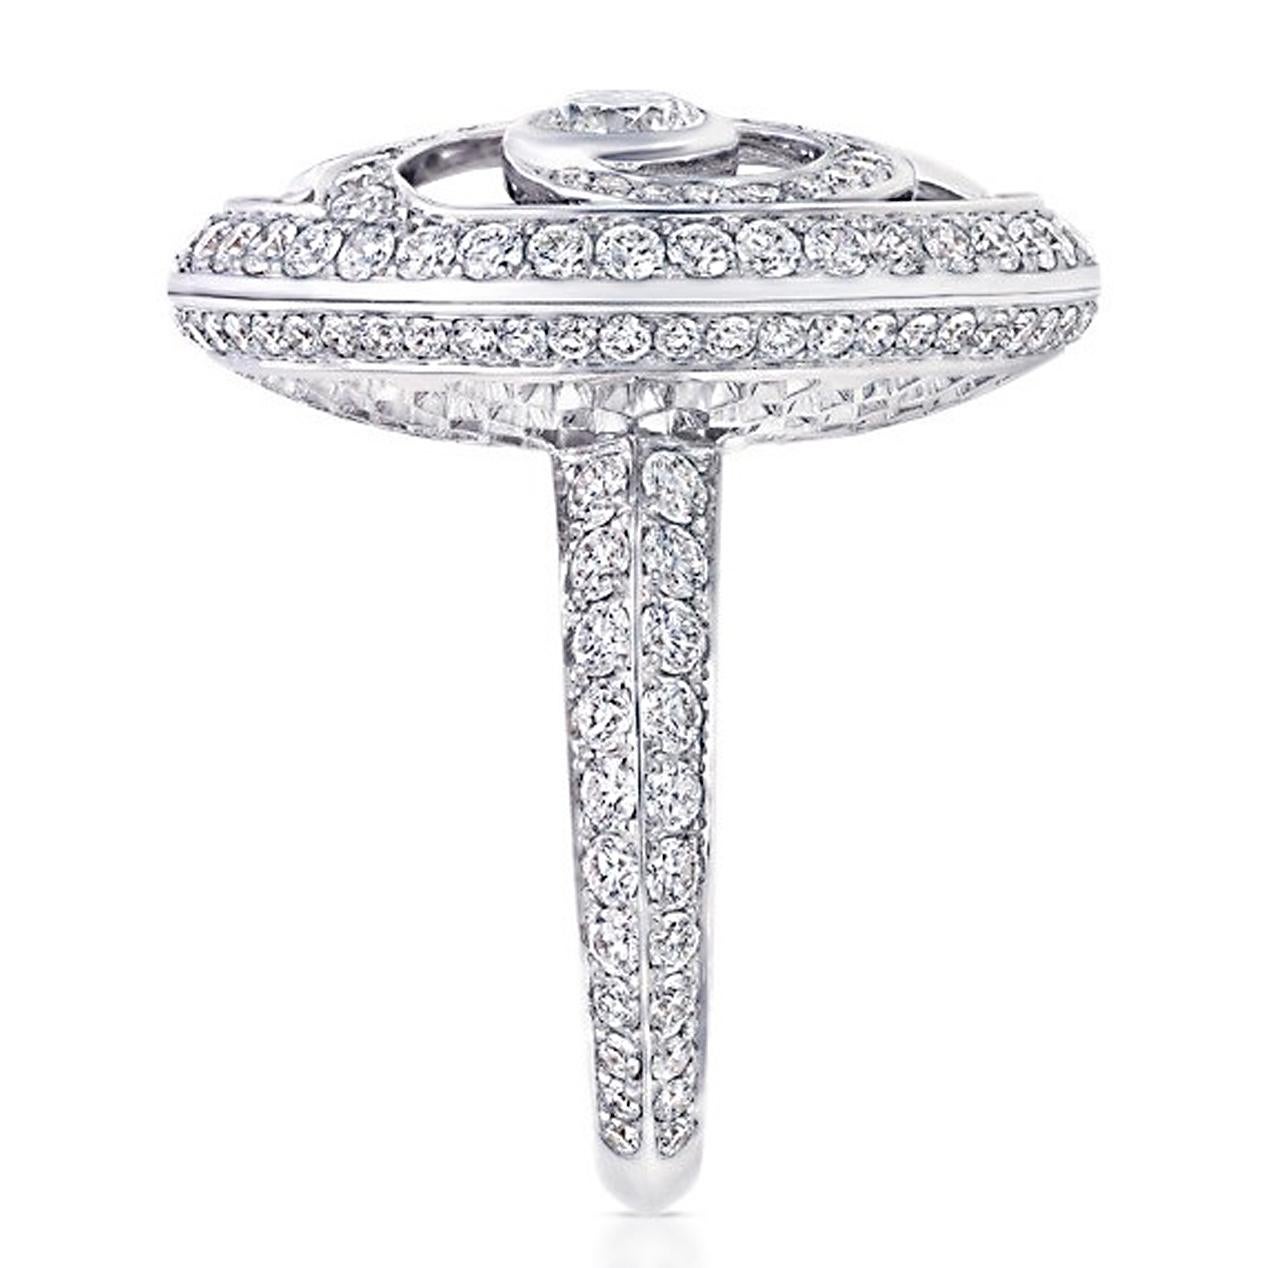 A magnificent Graff cocktail ring showcasing 4.30cts of the finest round brilliant cut diamonds set in 18k white gold. The ring measures a size 5 1/2 and can be resized if needed.